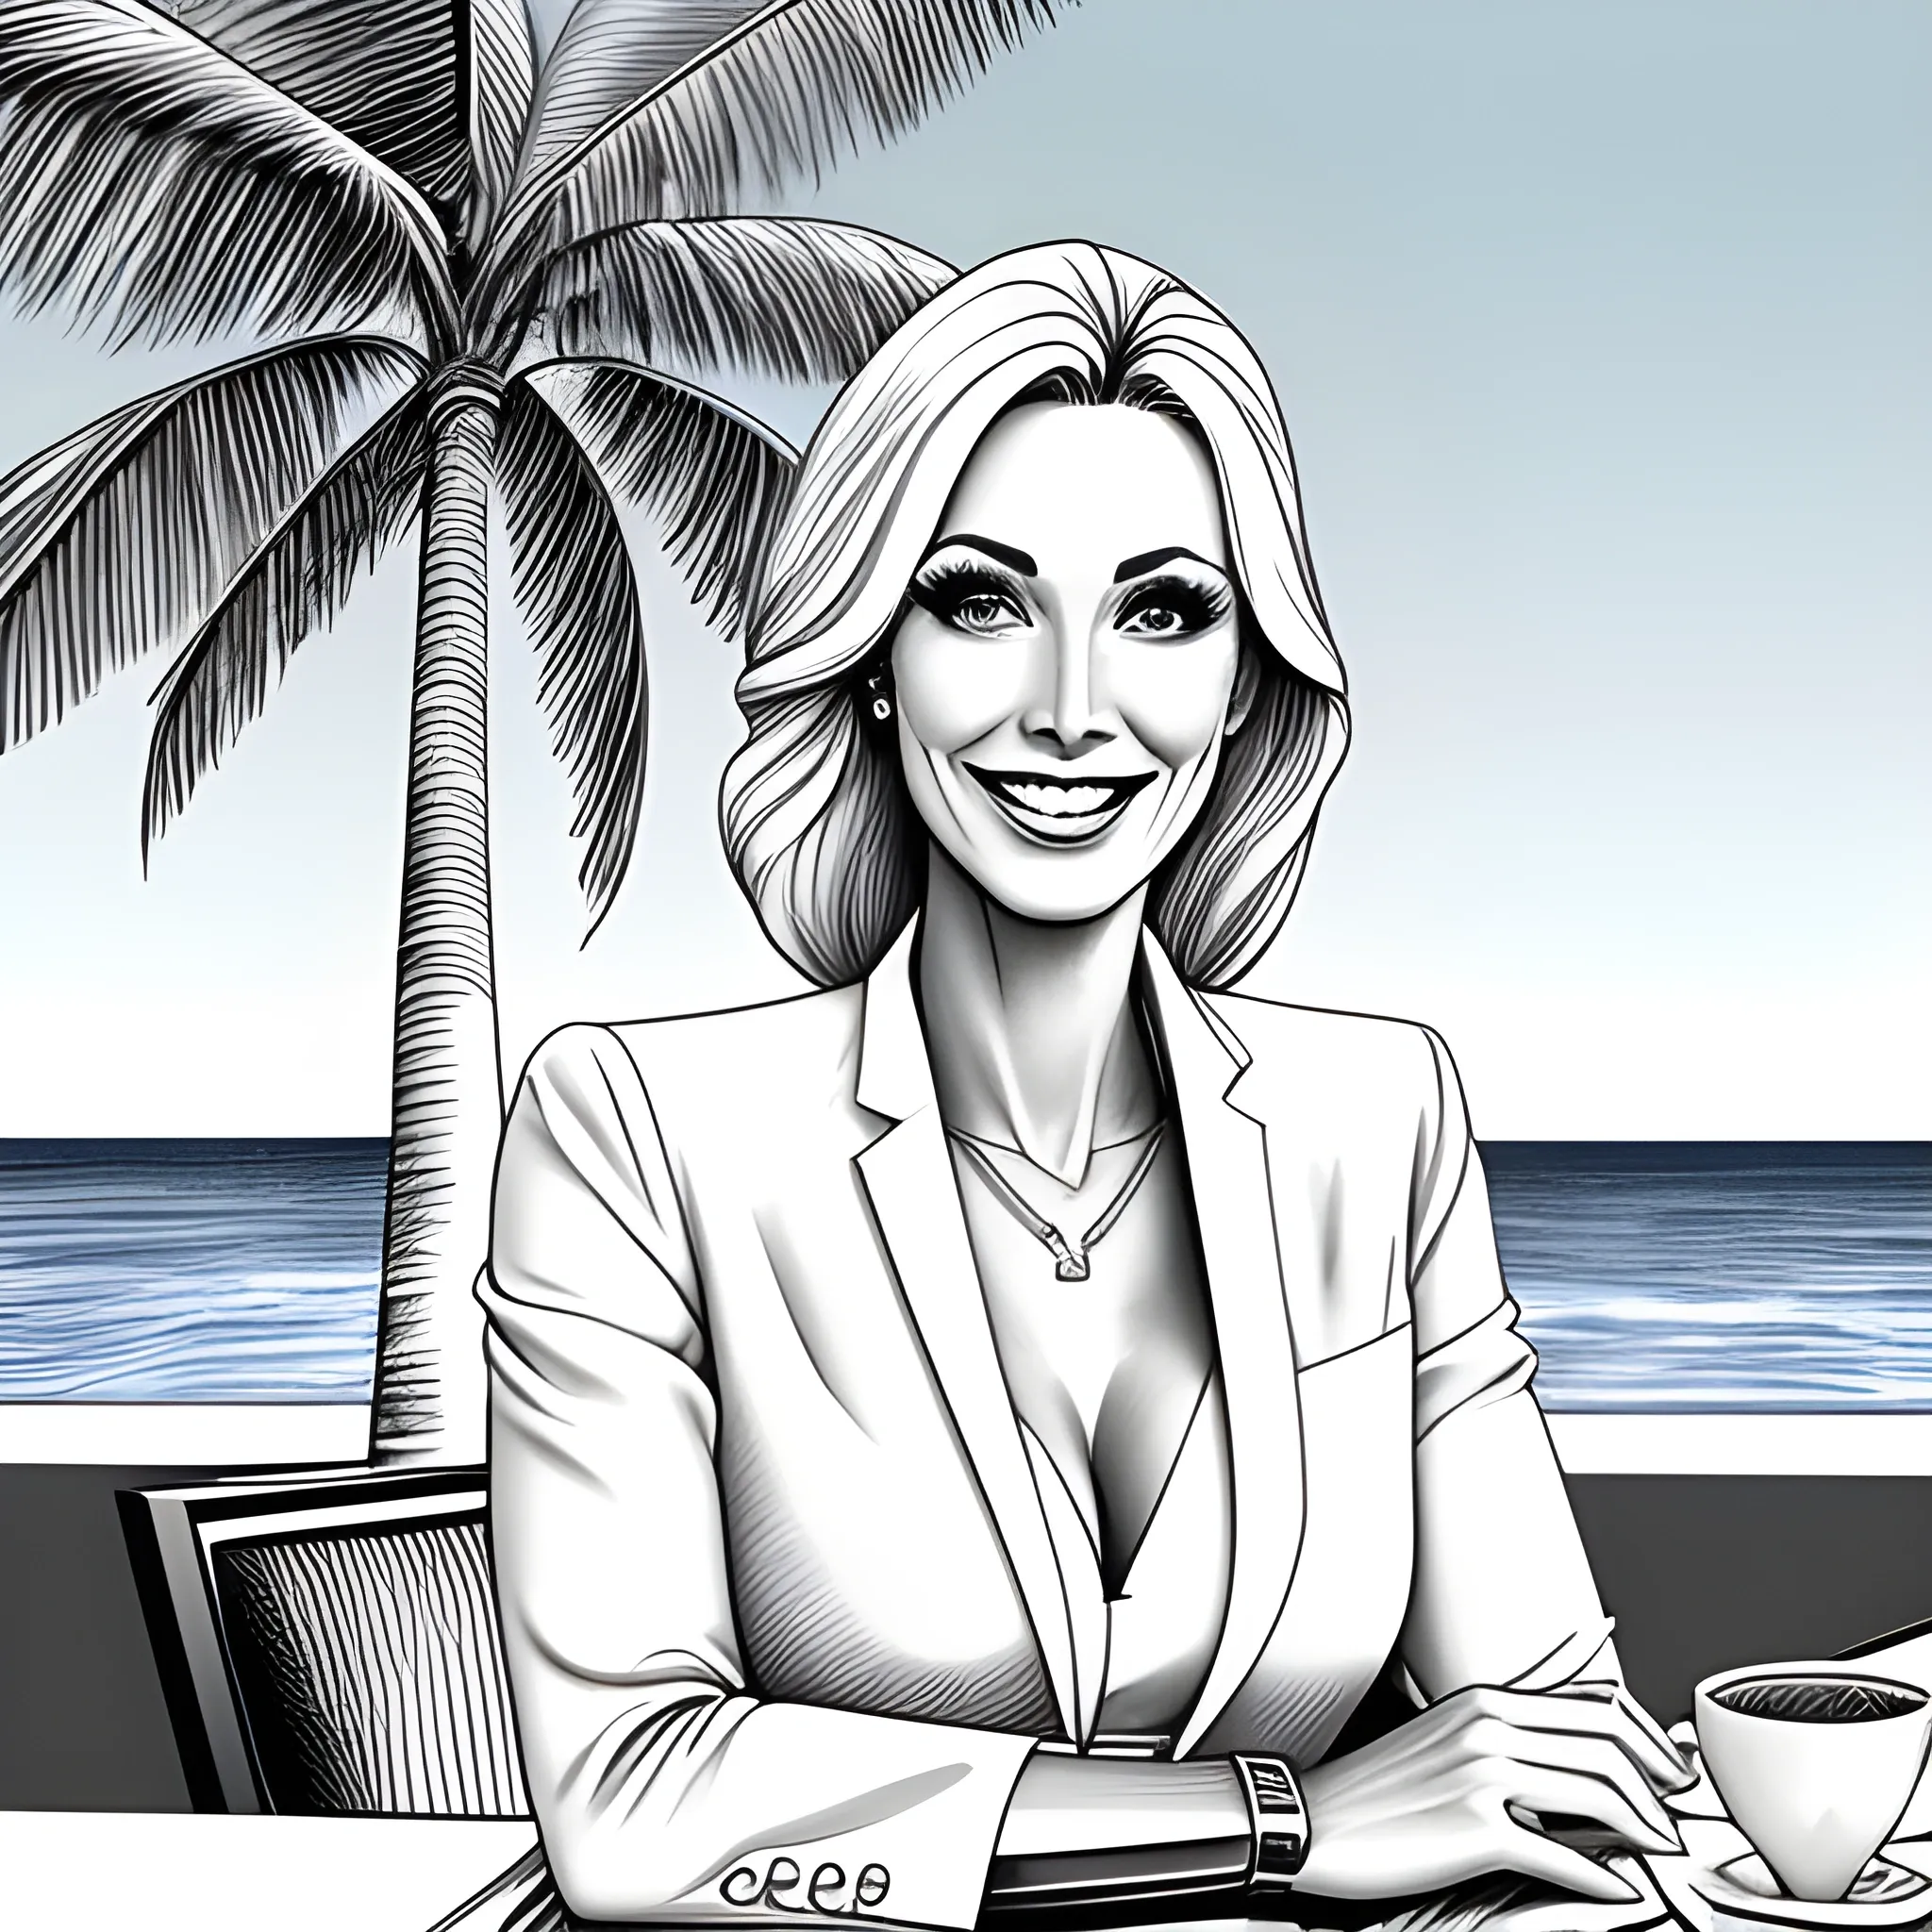 happy beautiful smiling girl blonde 35 years old in a white suit sits in a prestigious cafe with large windows overlooking the blue sky of the sea and palm trees, in the style of a pencil sketch, graphics, black and white style , Pencil Sketch